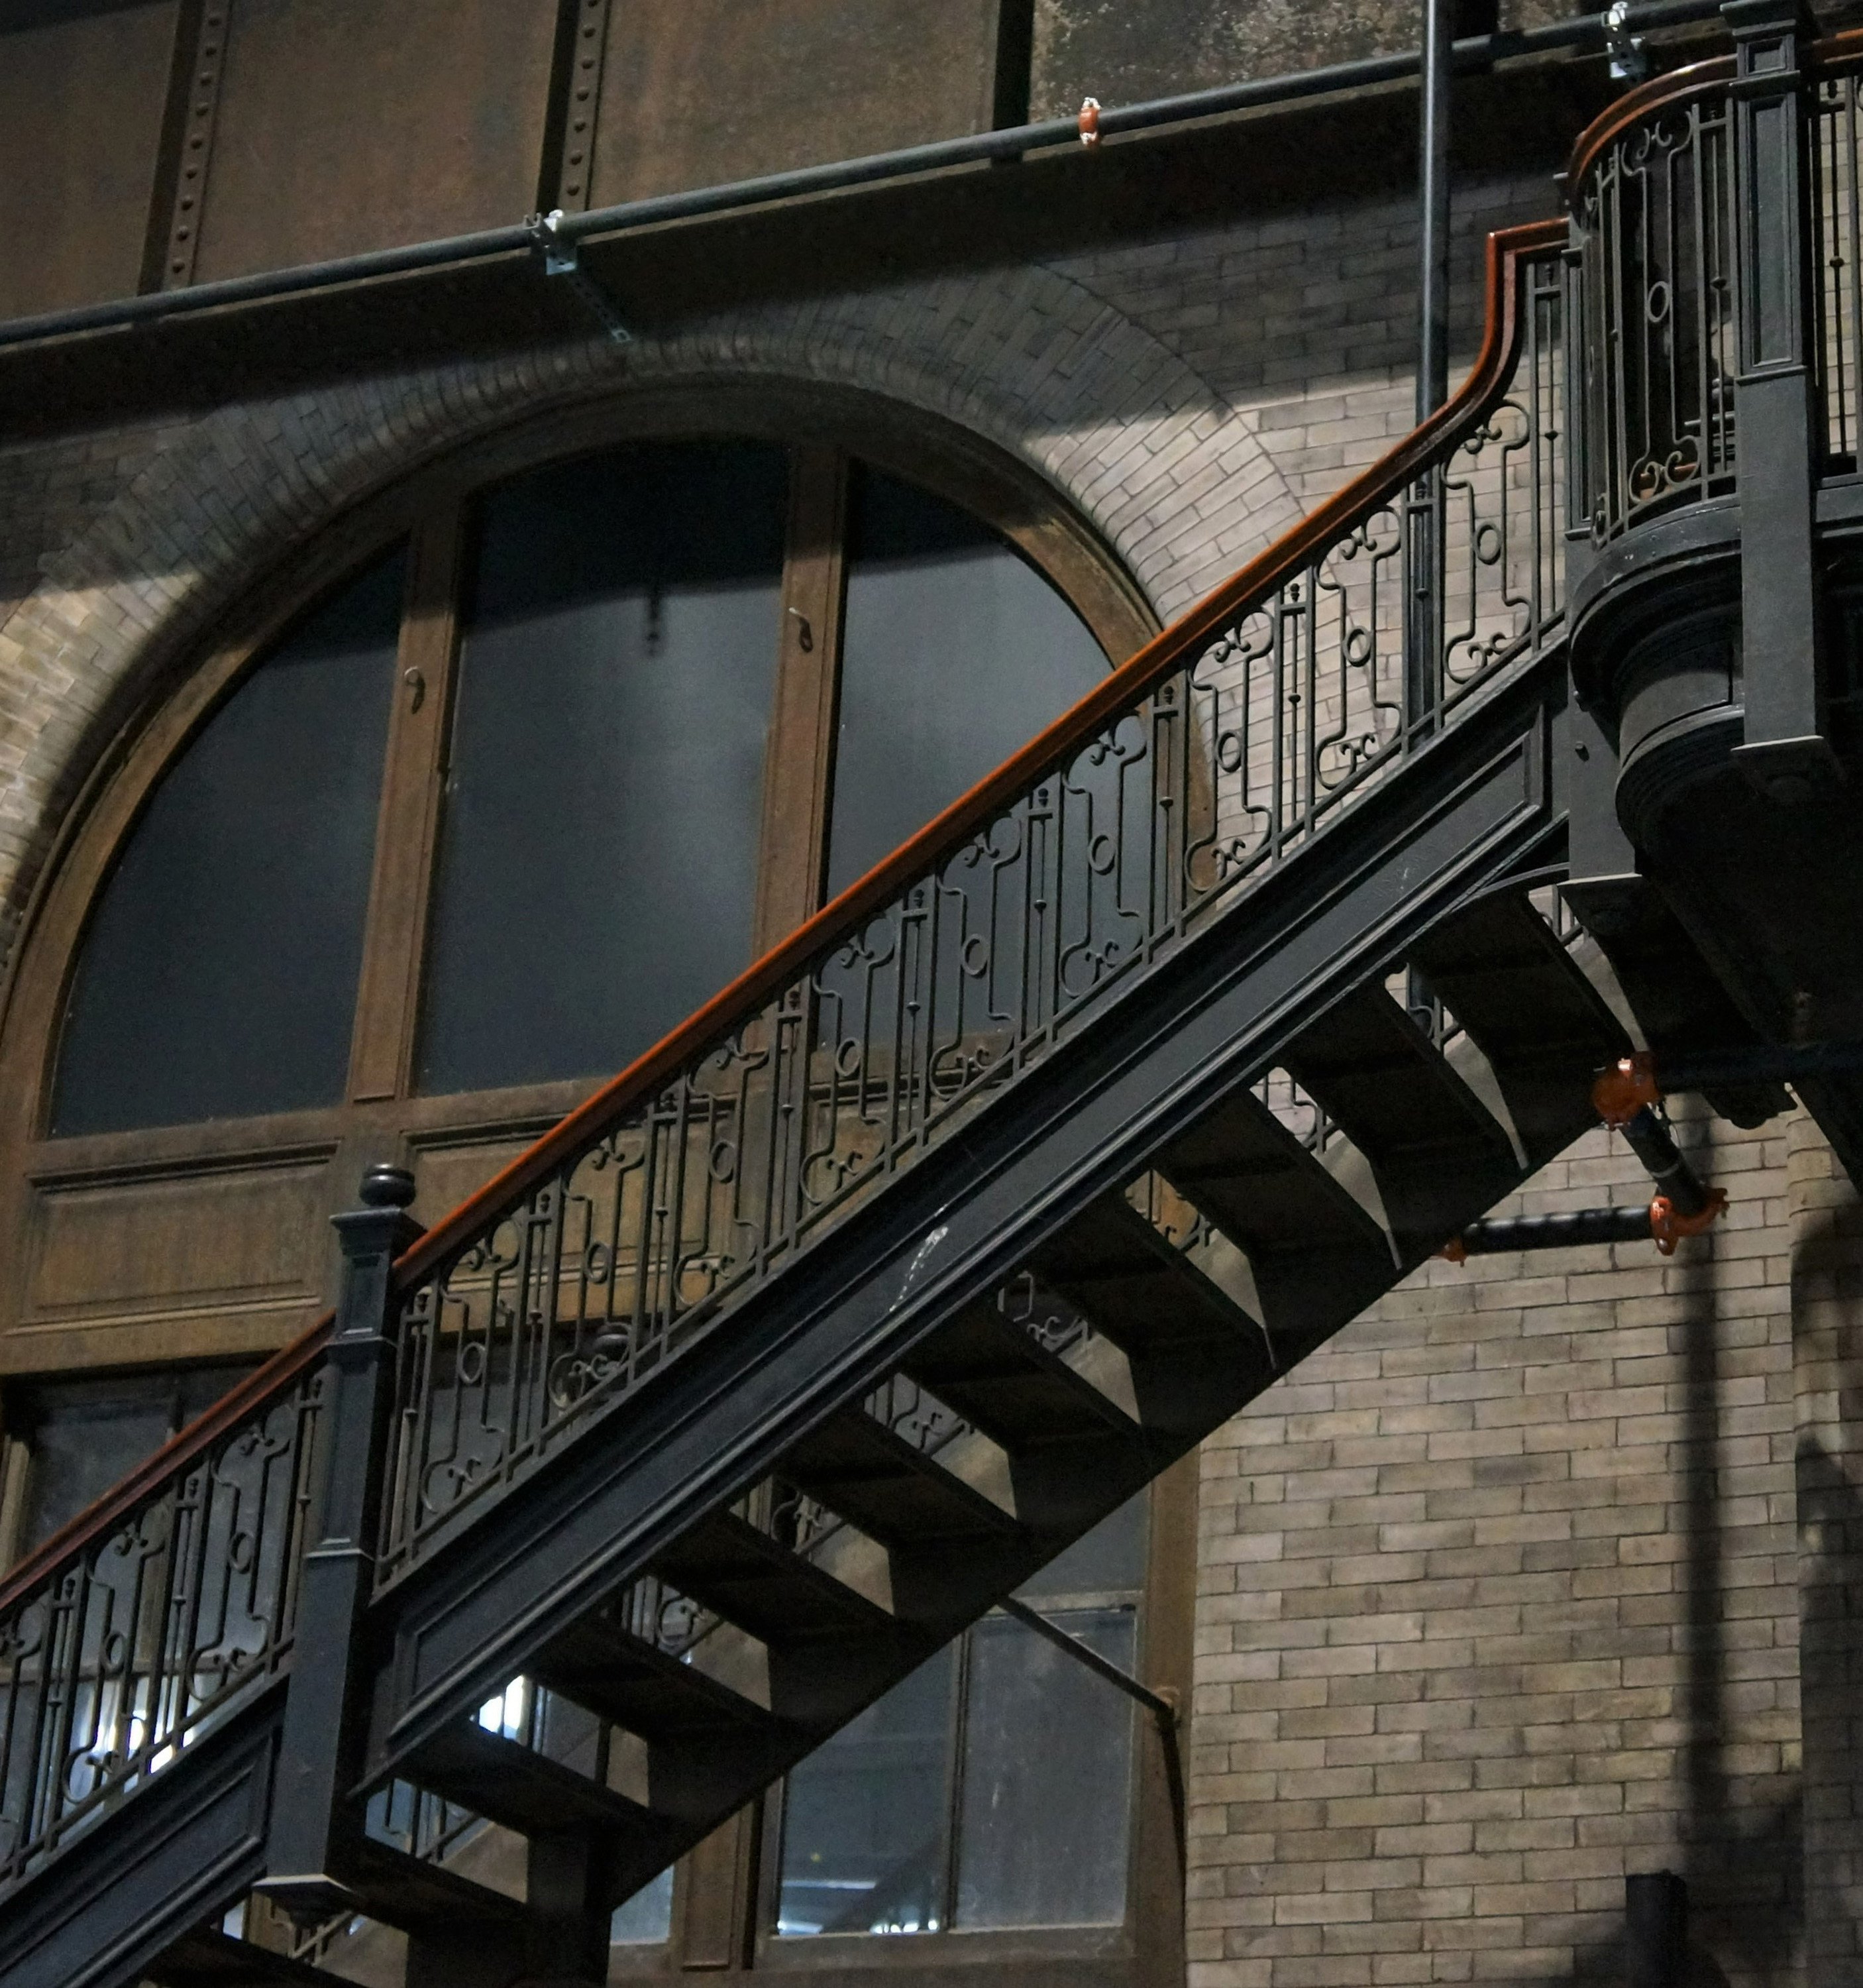 Wrought-iron staircases and arched windows in the plant